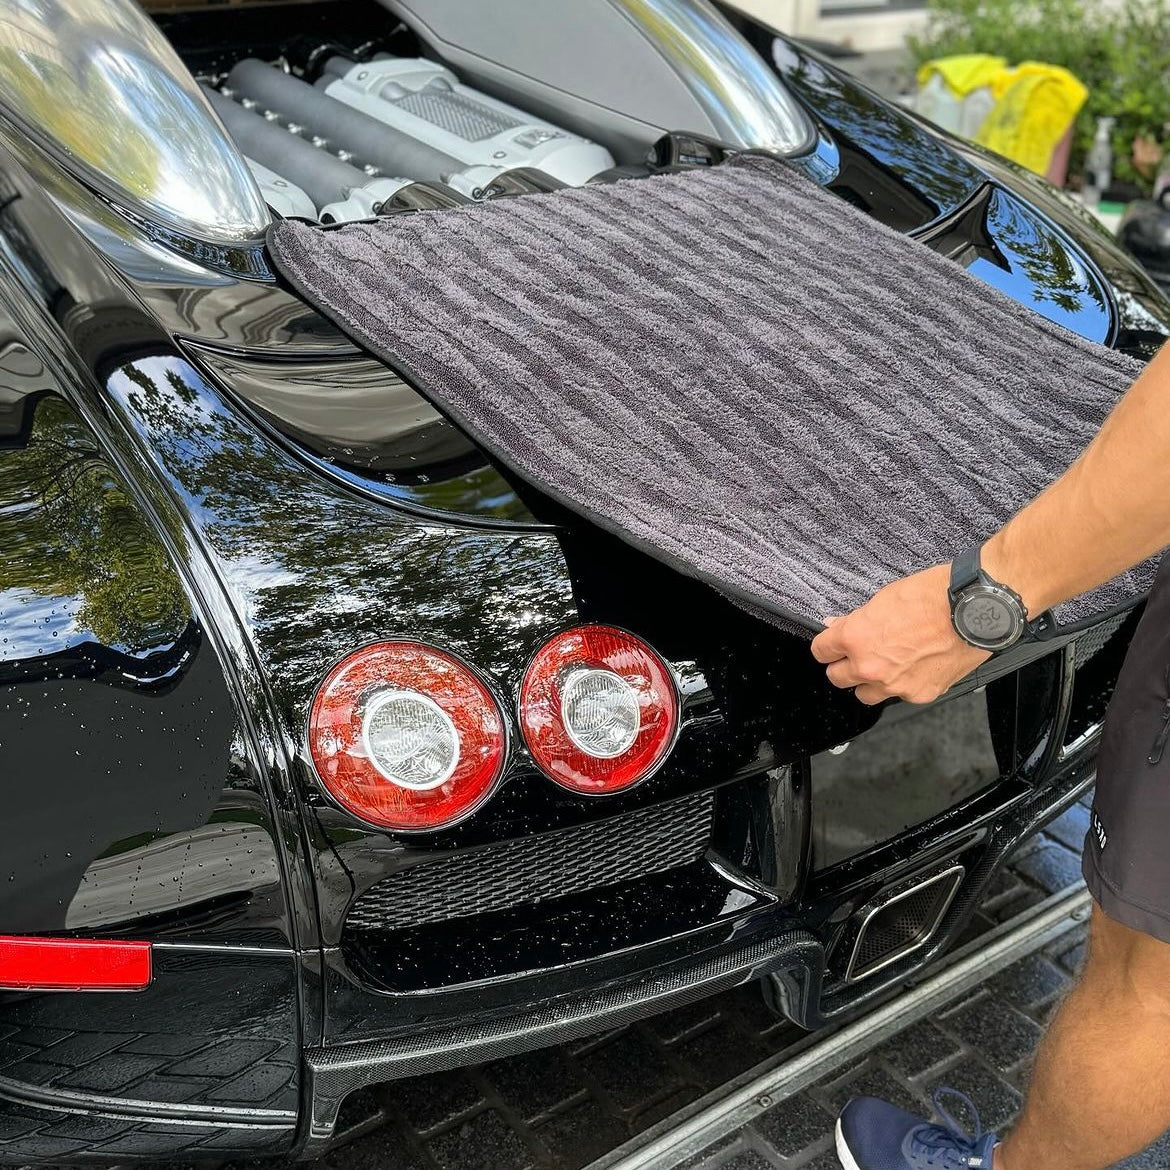 Ultimate drying towel in use on a Bugatti 